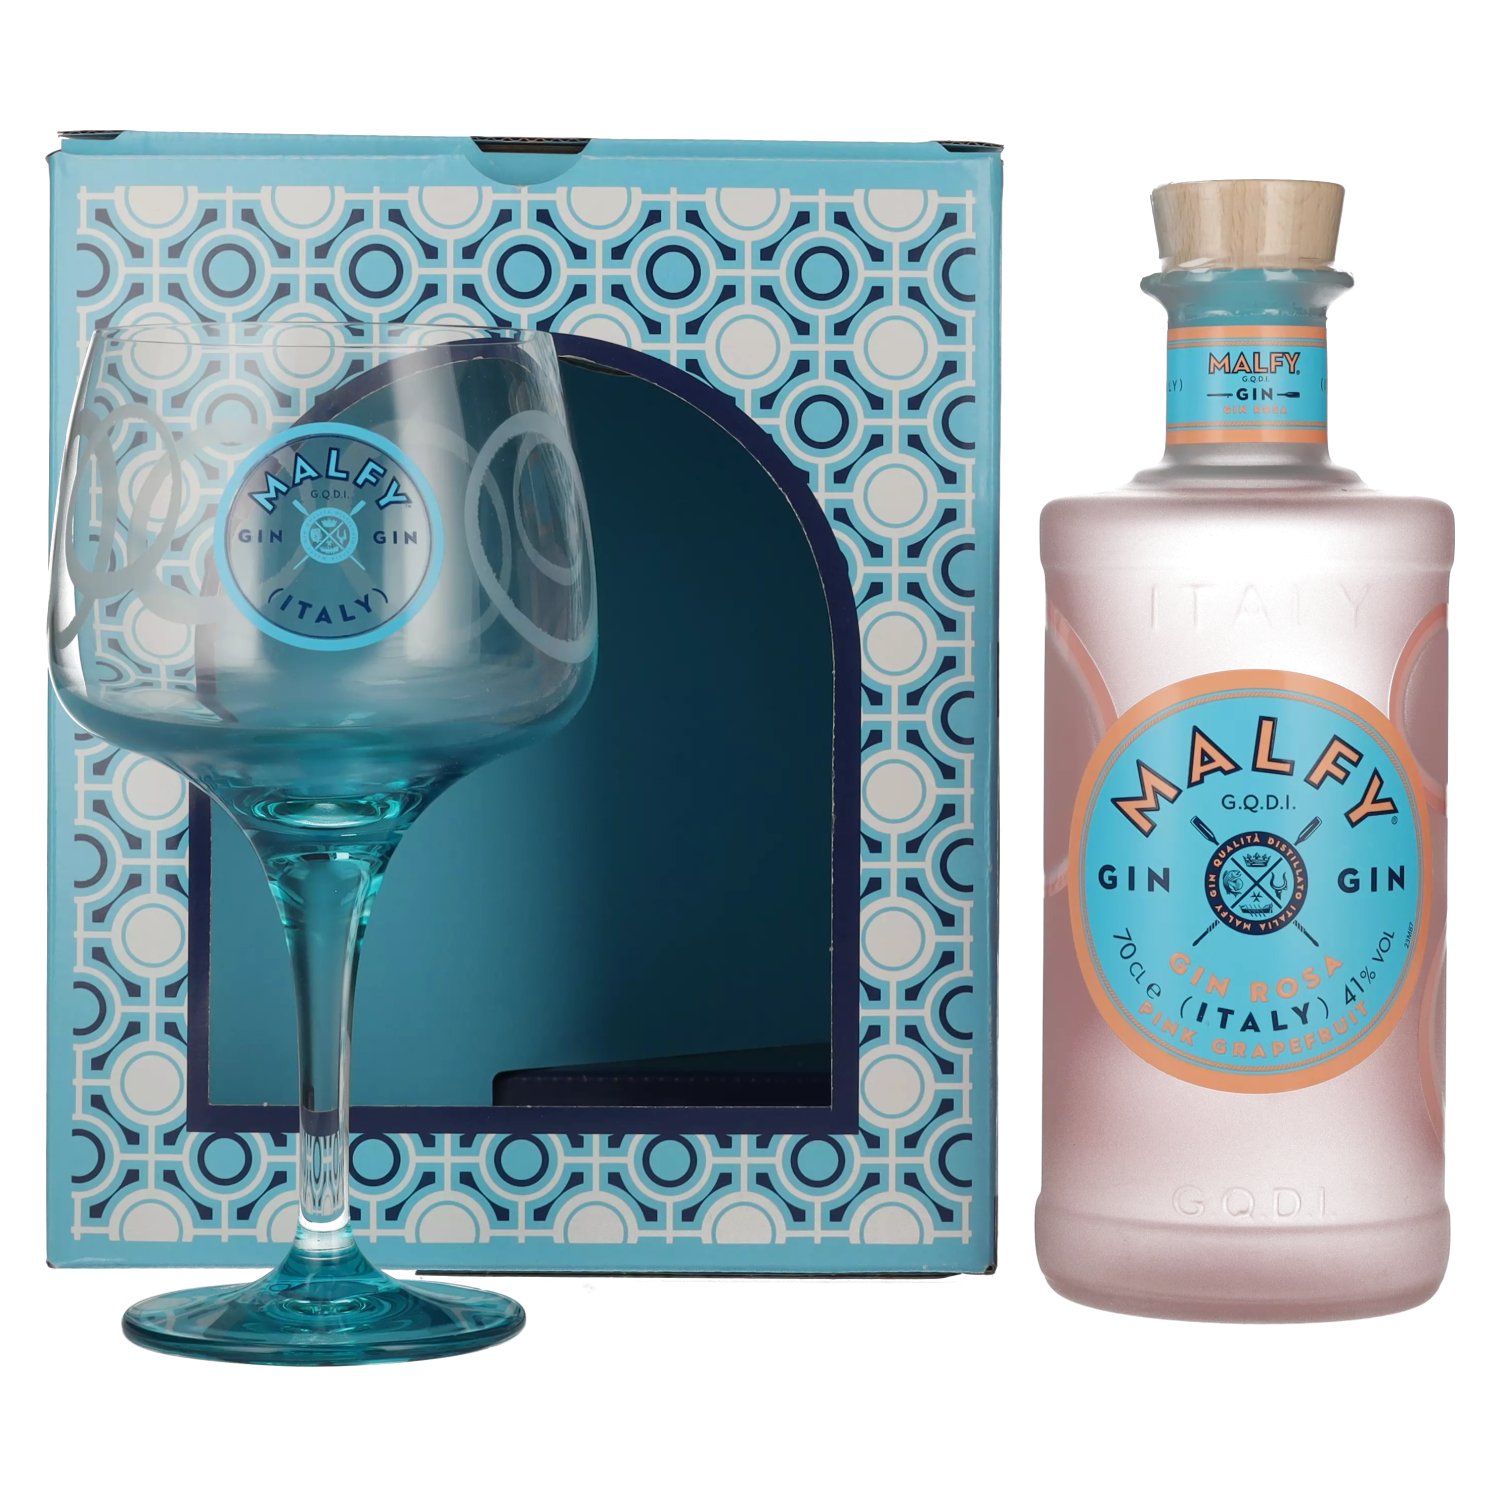 glass Giftbox with in Vol. Malfy ROSA Grapefruit Gin Sicilian 41% Pink 0,7l